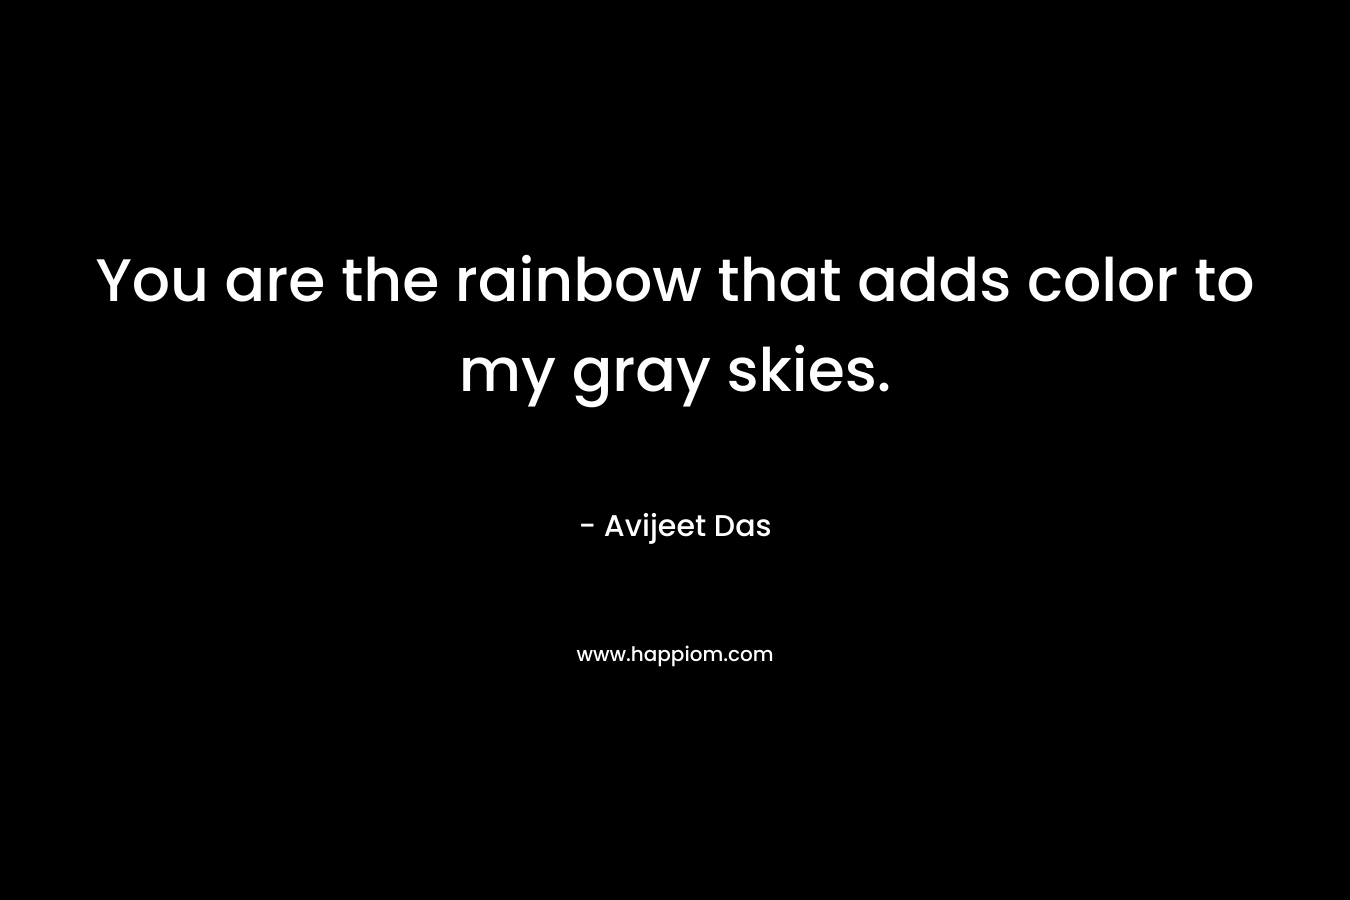 You are the rainbow that adds color to my gray skies.